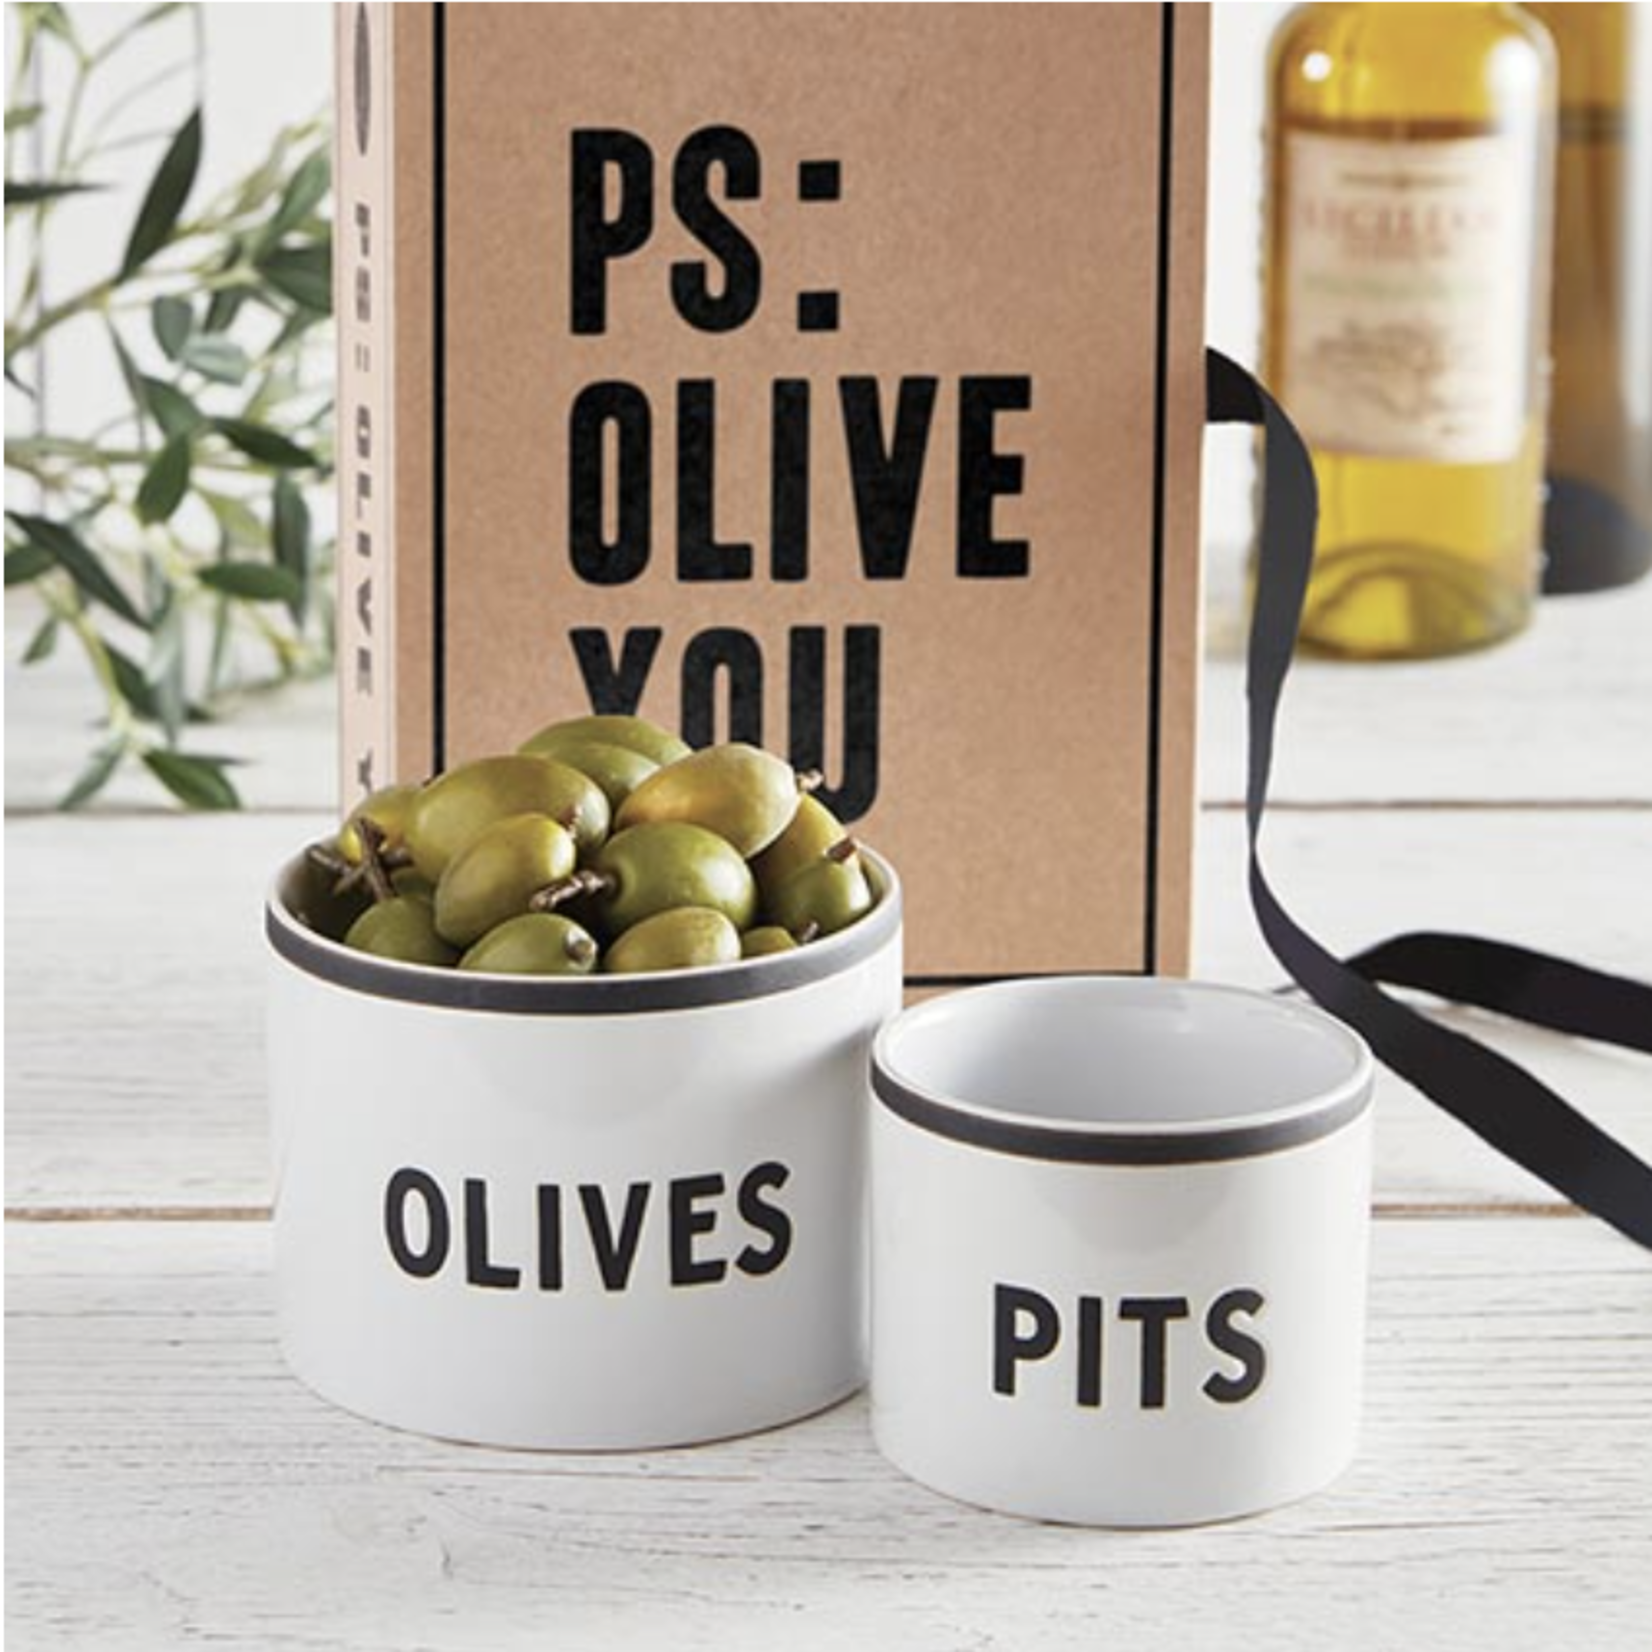 Outside The Box 3" & 2" Set of 2 " Olives & Pits - PS: Olive You"  Bowls In Book Box